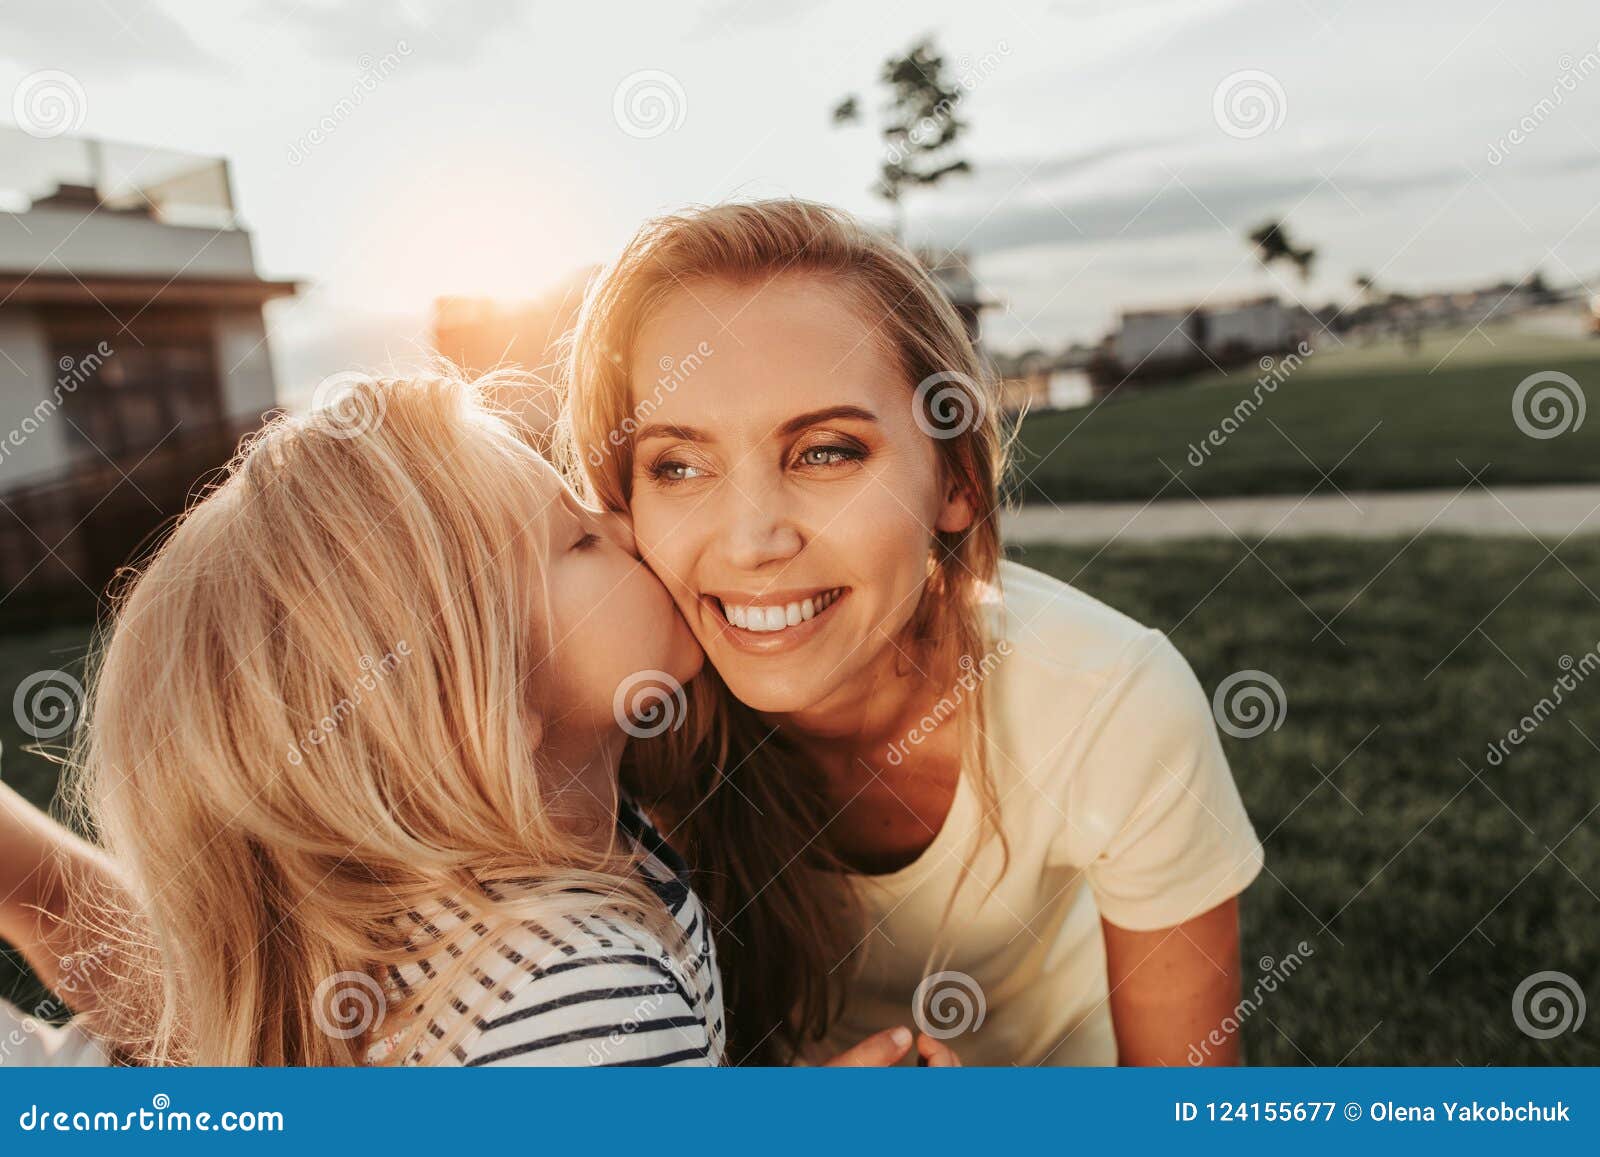 Glad Daughter Showing Affection For Optimistic Mother Stock Image Image Of Love Cute 124155677